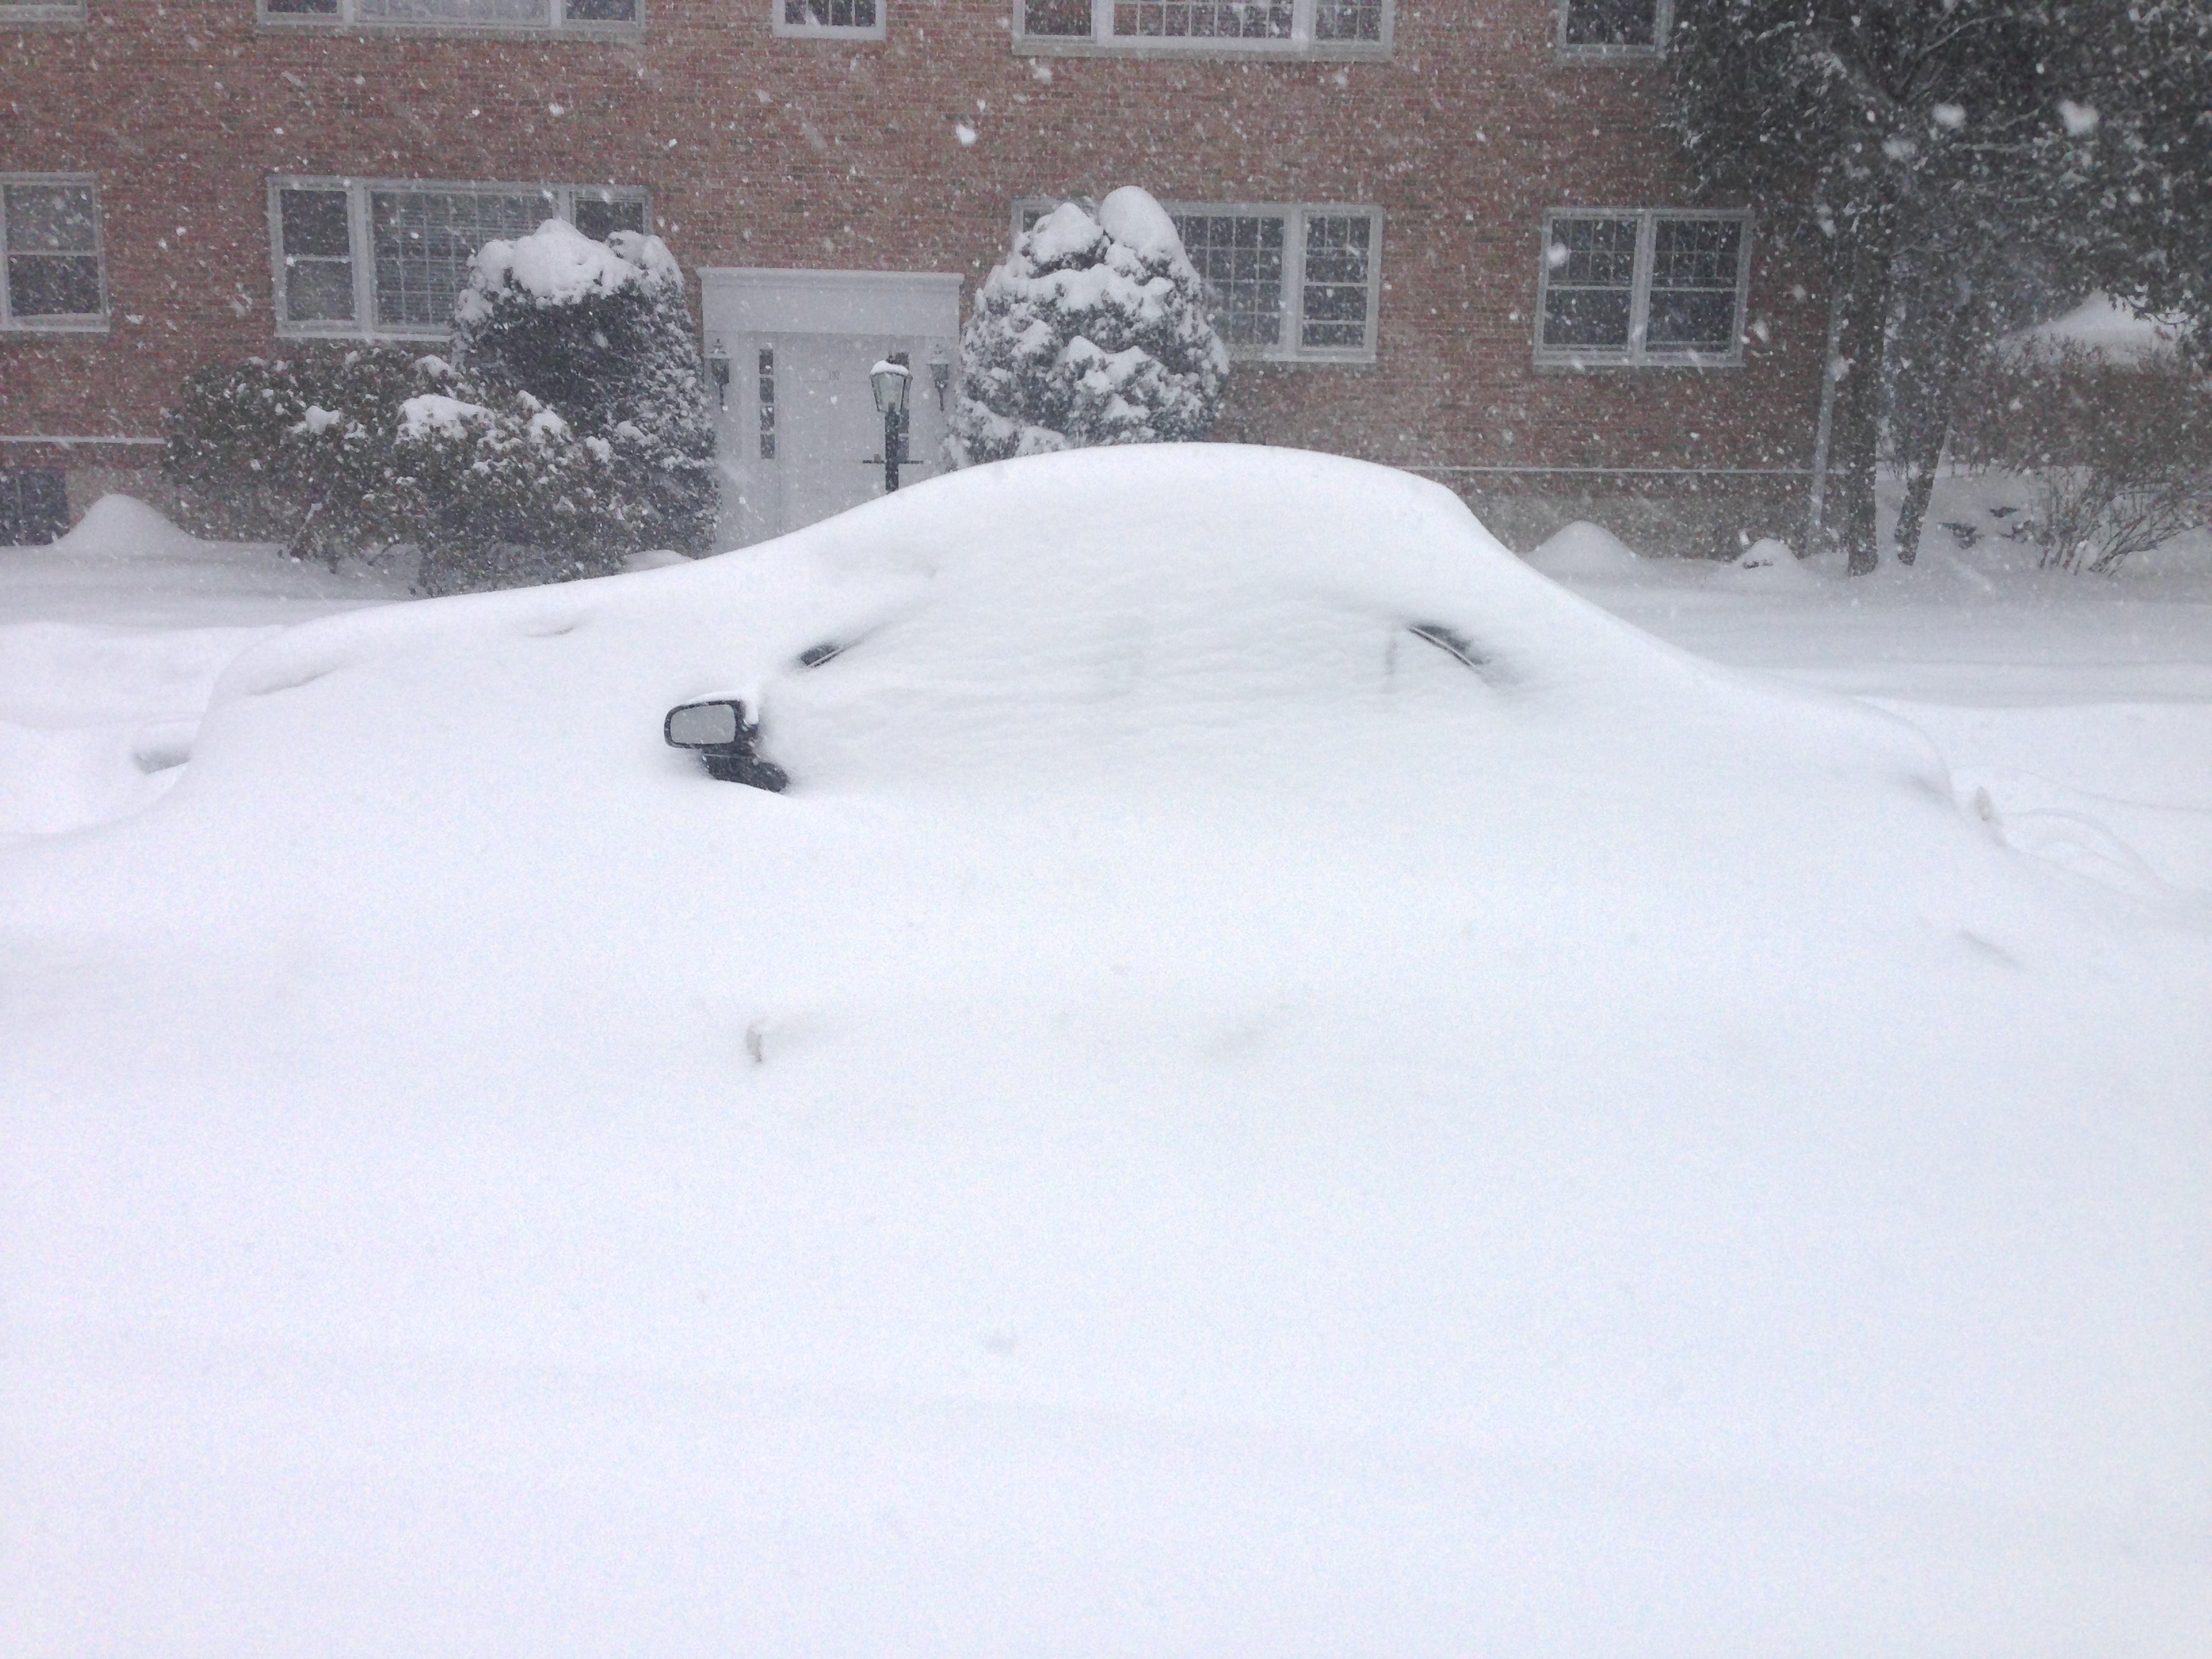 Car on Heritage Hill Road during Winter Storm Pax, Feb. 13, 2014. Credit: Terry Dinan